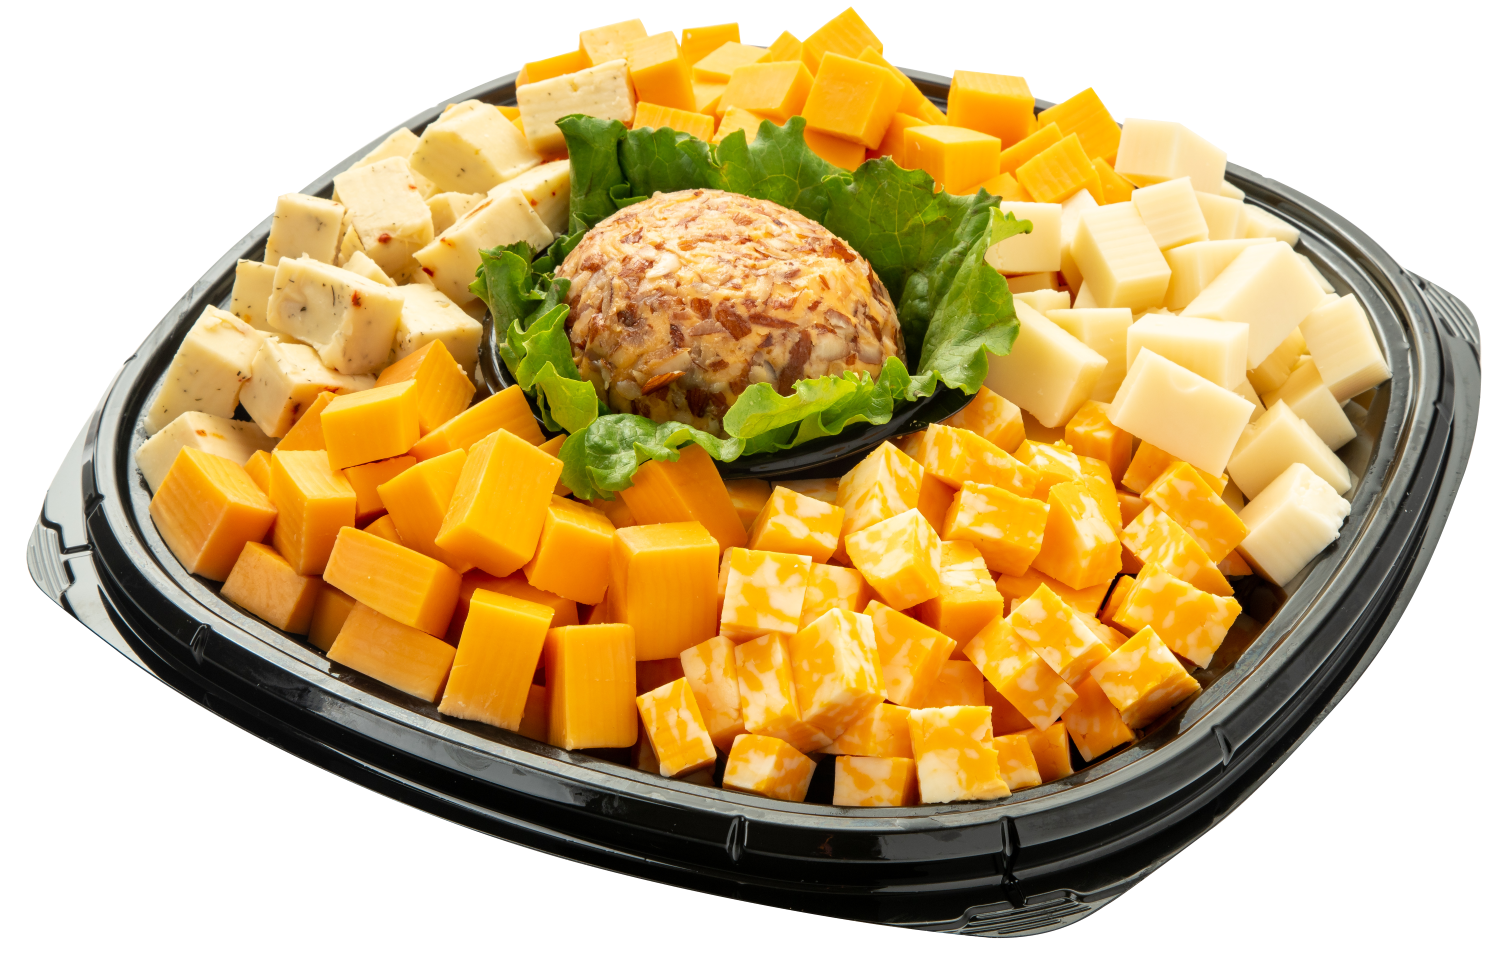 Deli Trays, Party Trays & More - Brookshire Brothers